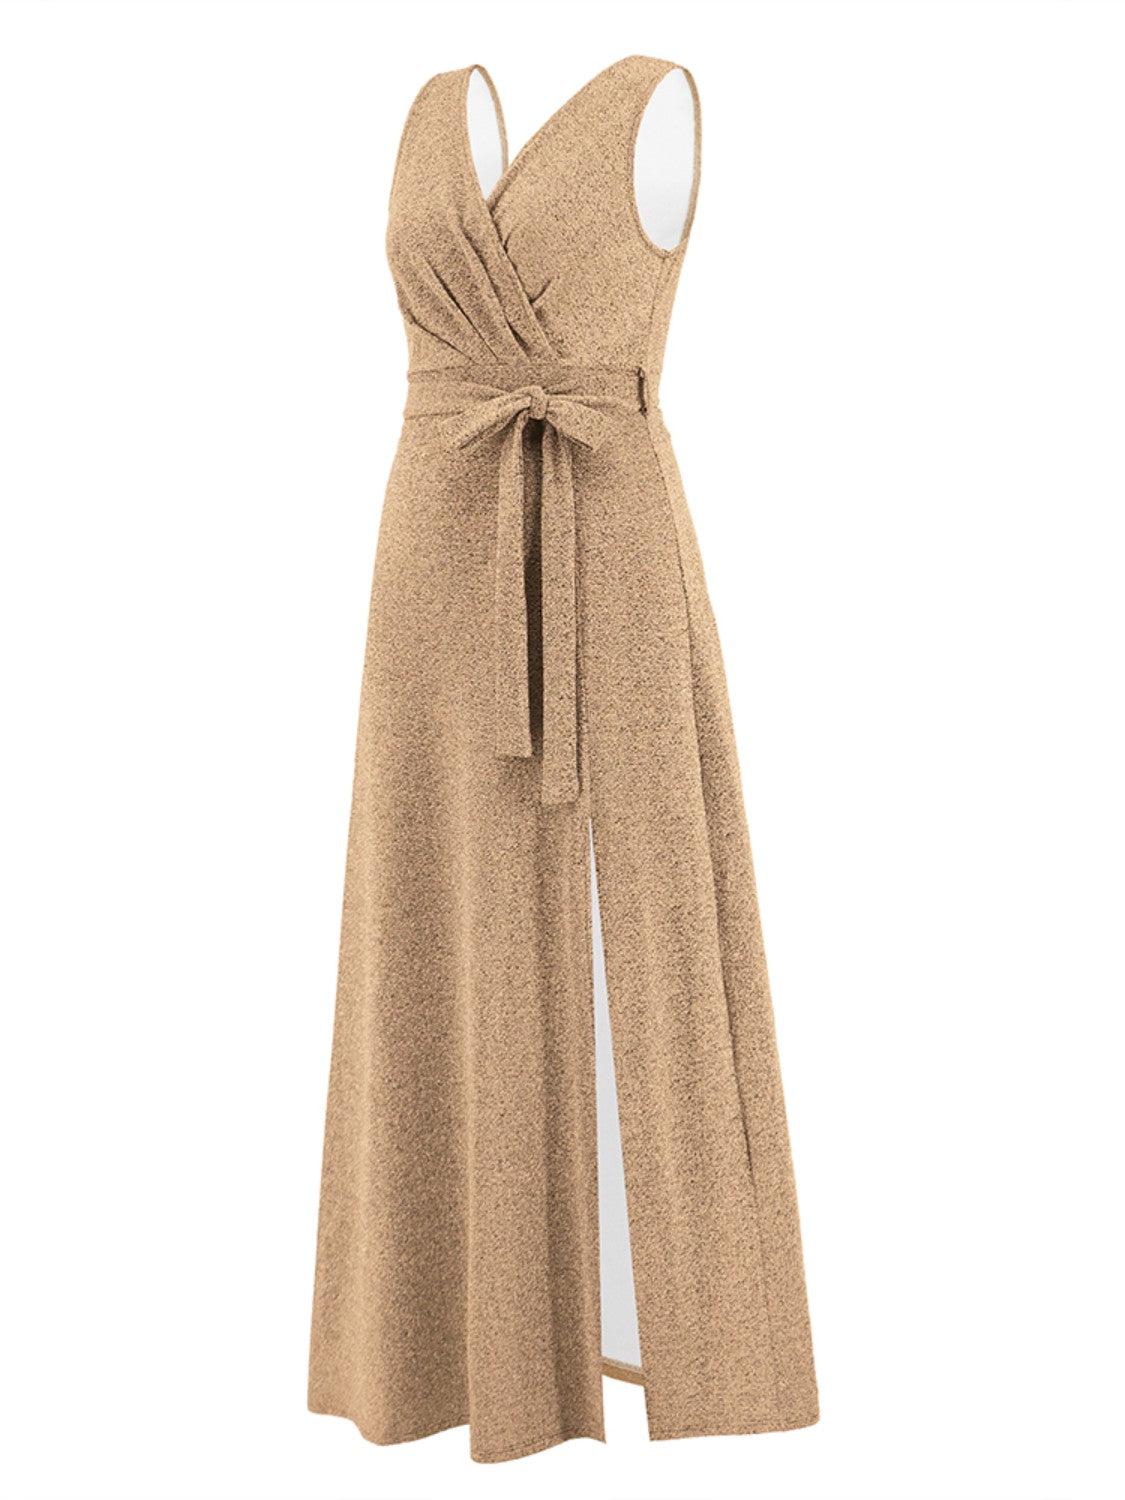 a tan dress with a slit down the middle